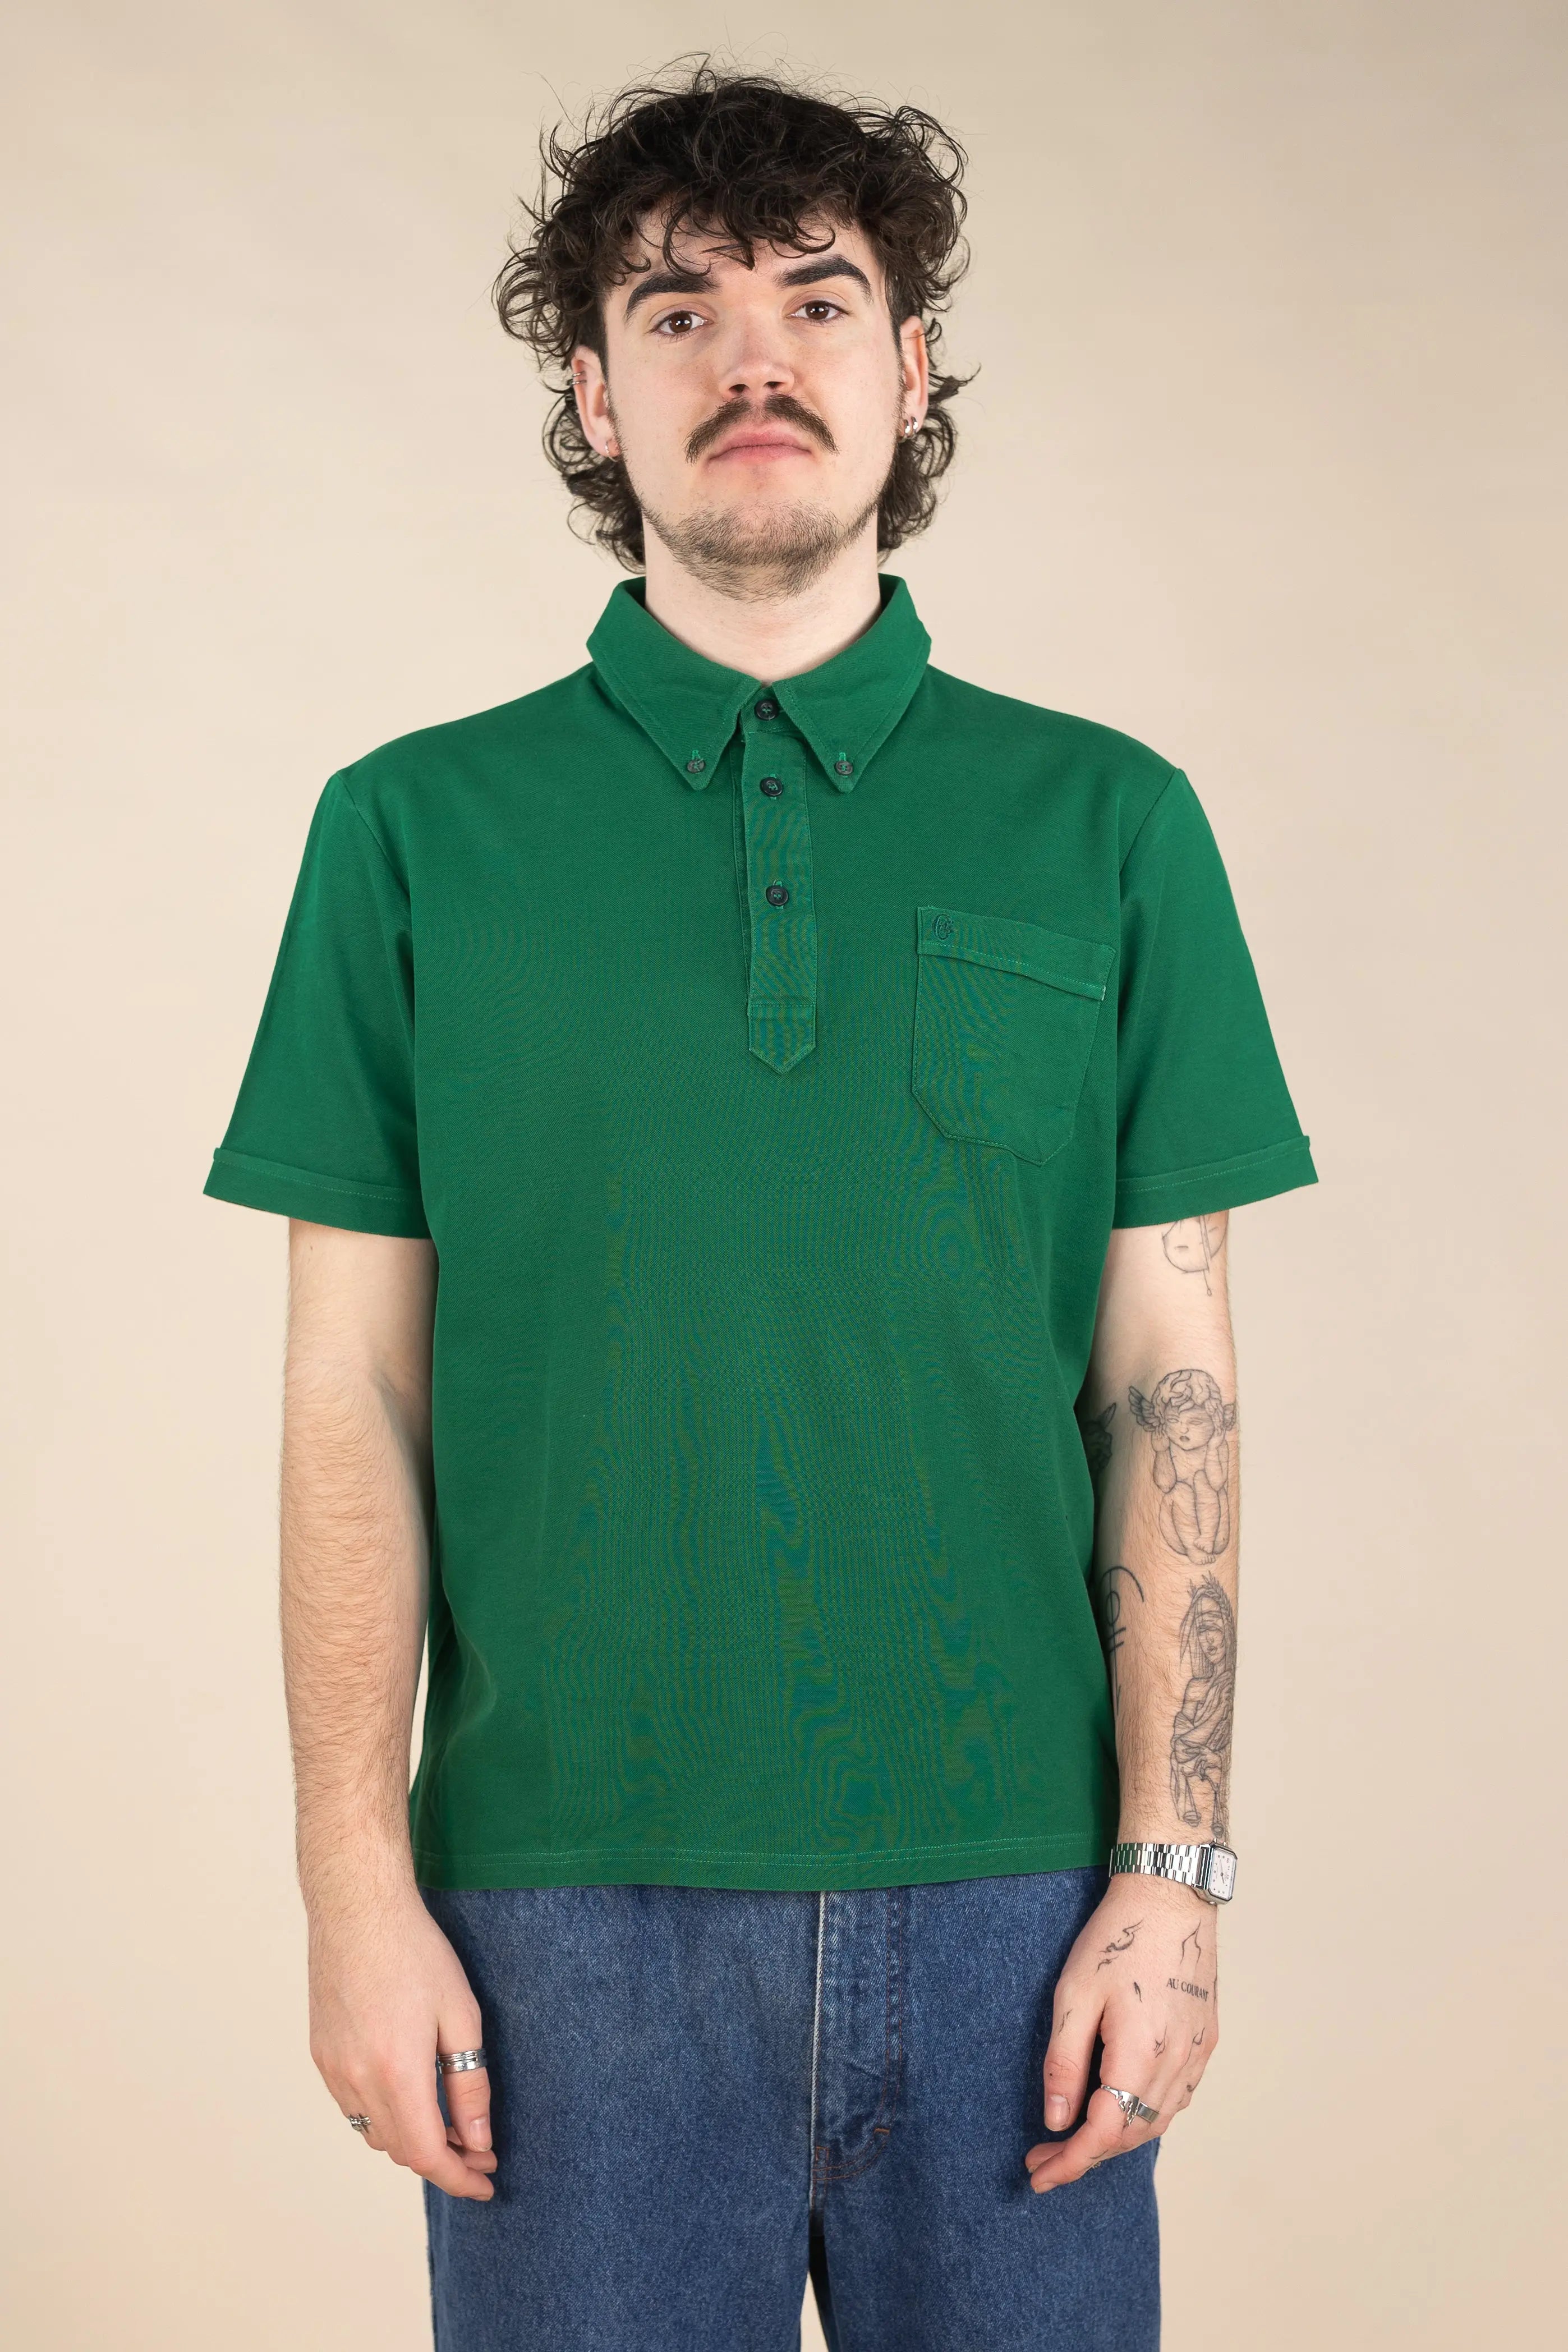 Conte of Florence - Polo Shirt- ThriftTale.com - Vintage and second handclothing